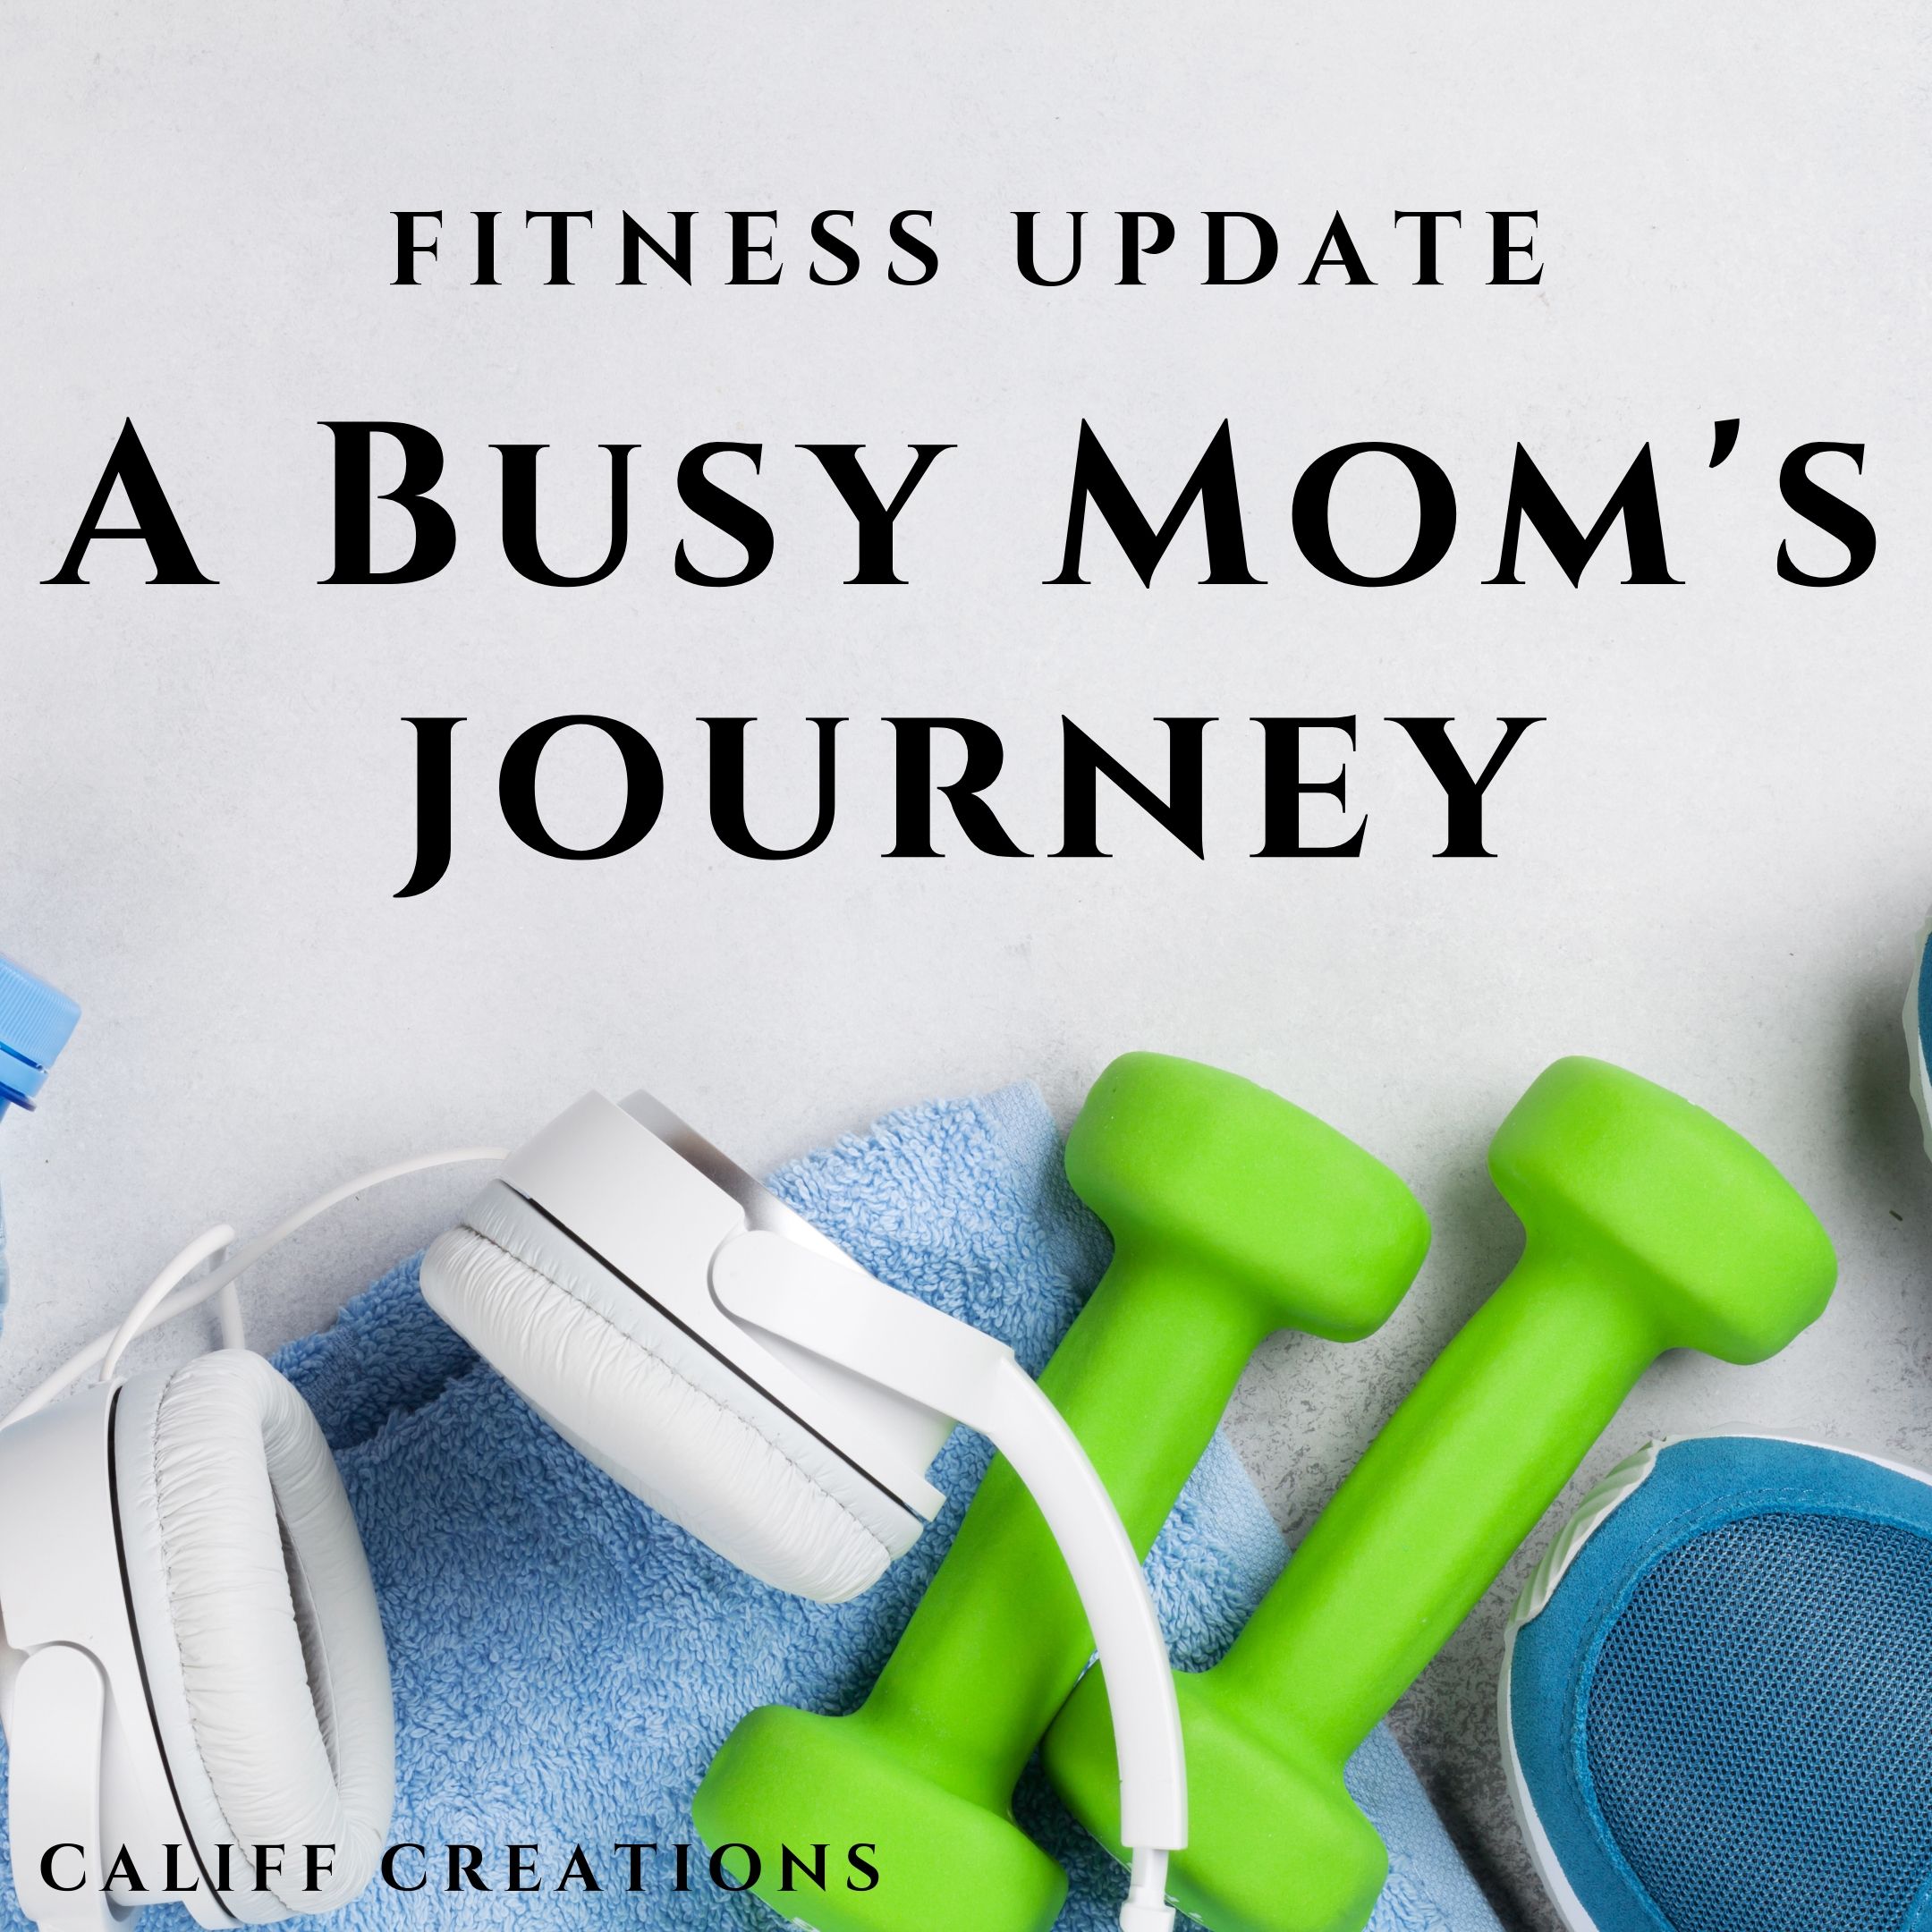 Fitness Update: A Busy Mom's Journey